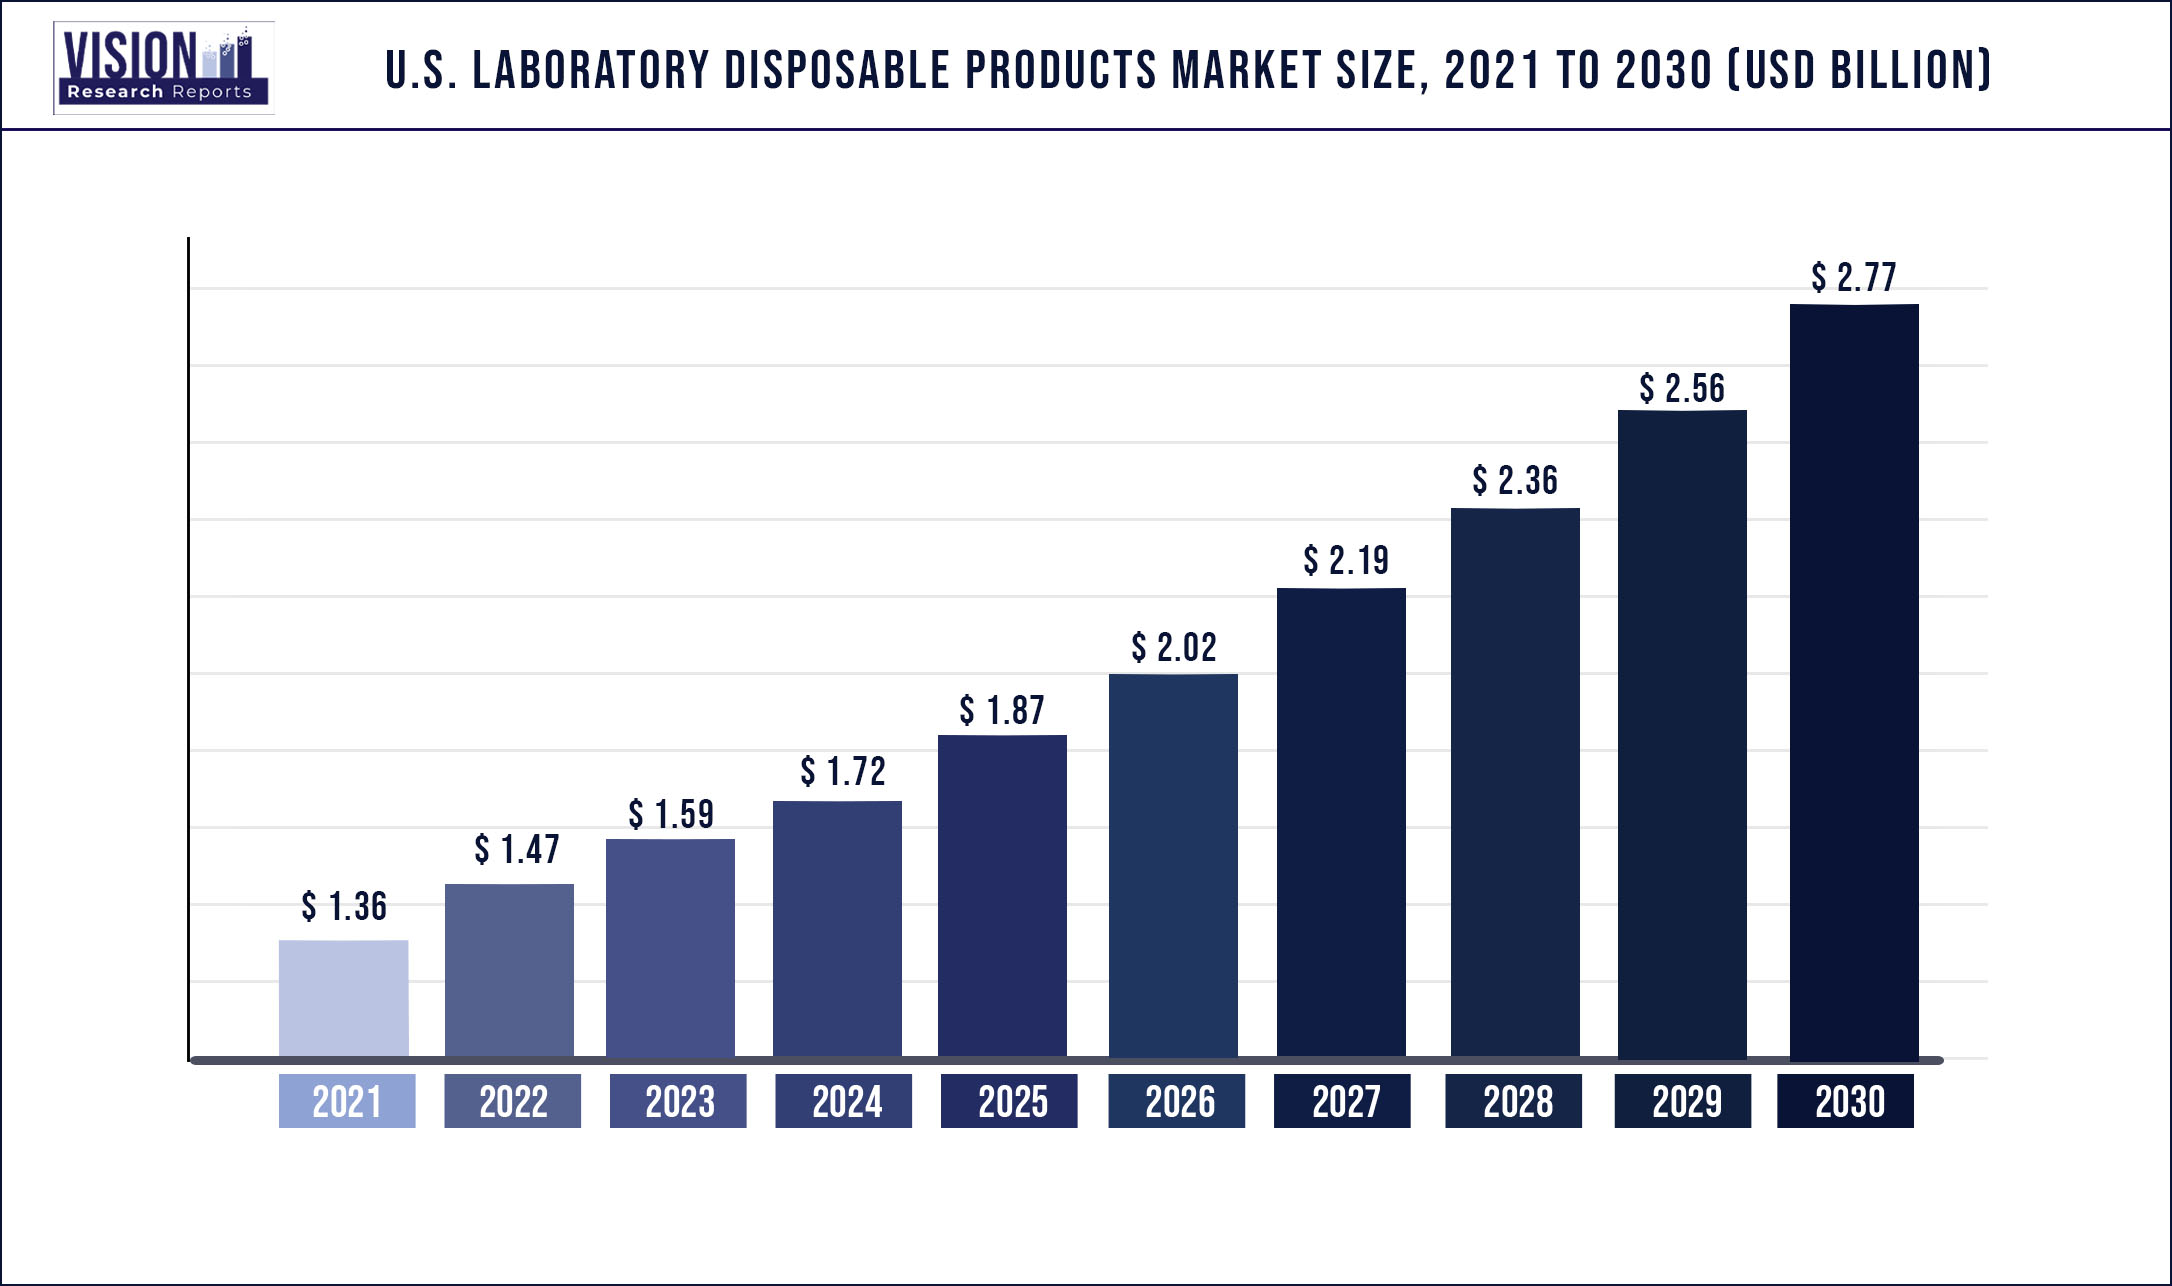 U.S. Laboratory Disposable Products Market Size 2021 to 2030